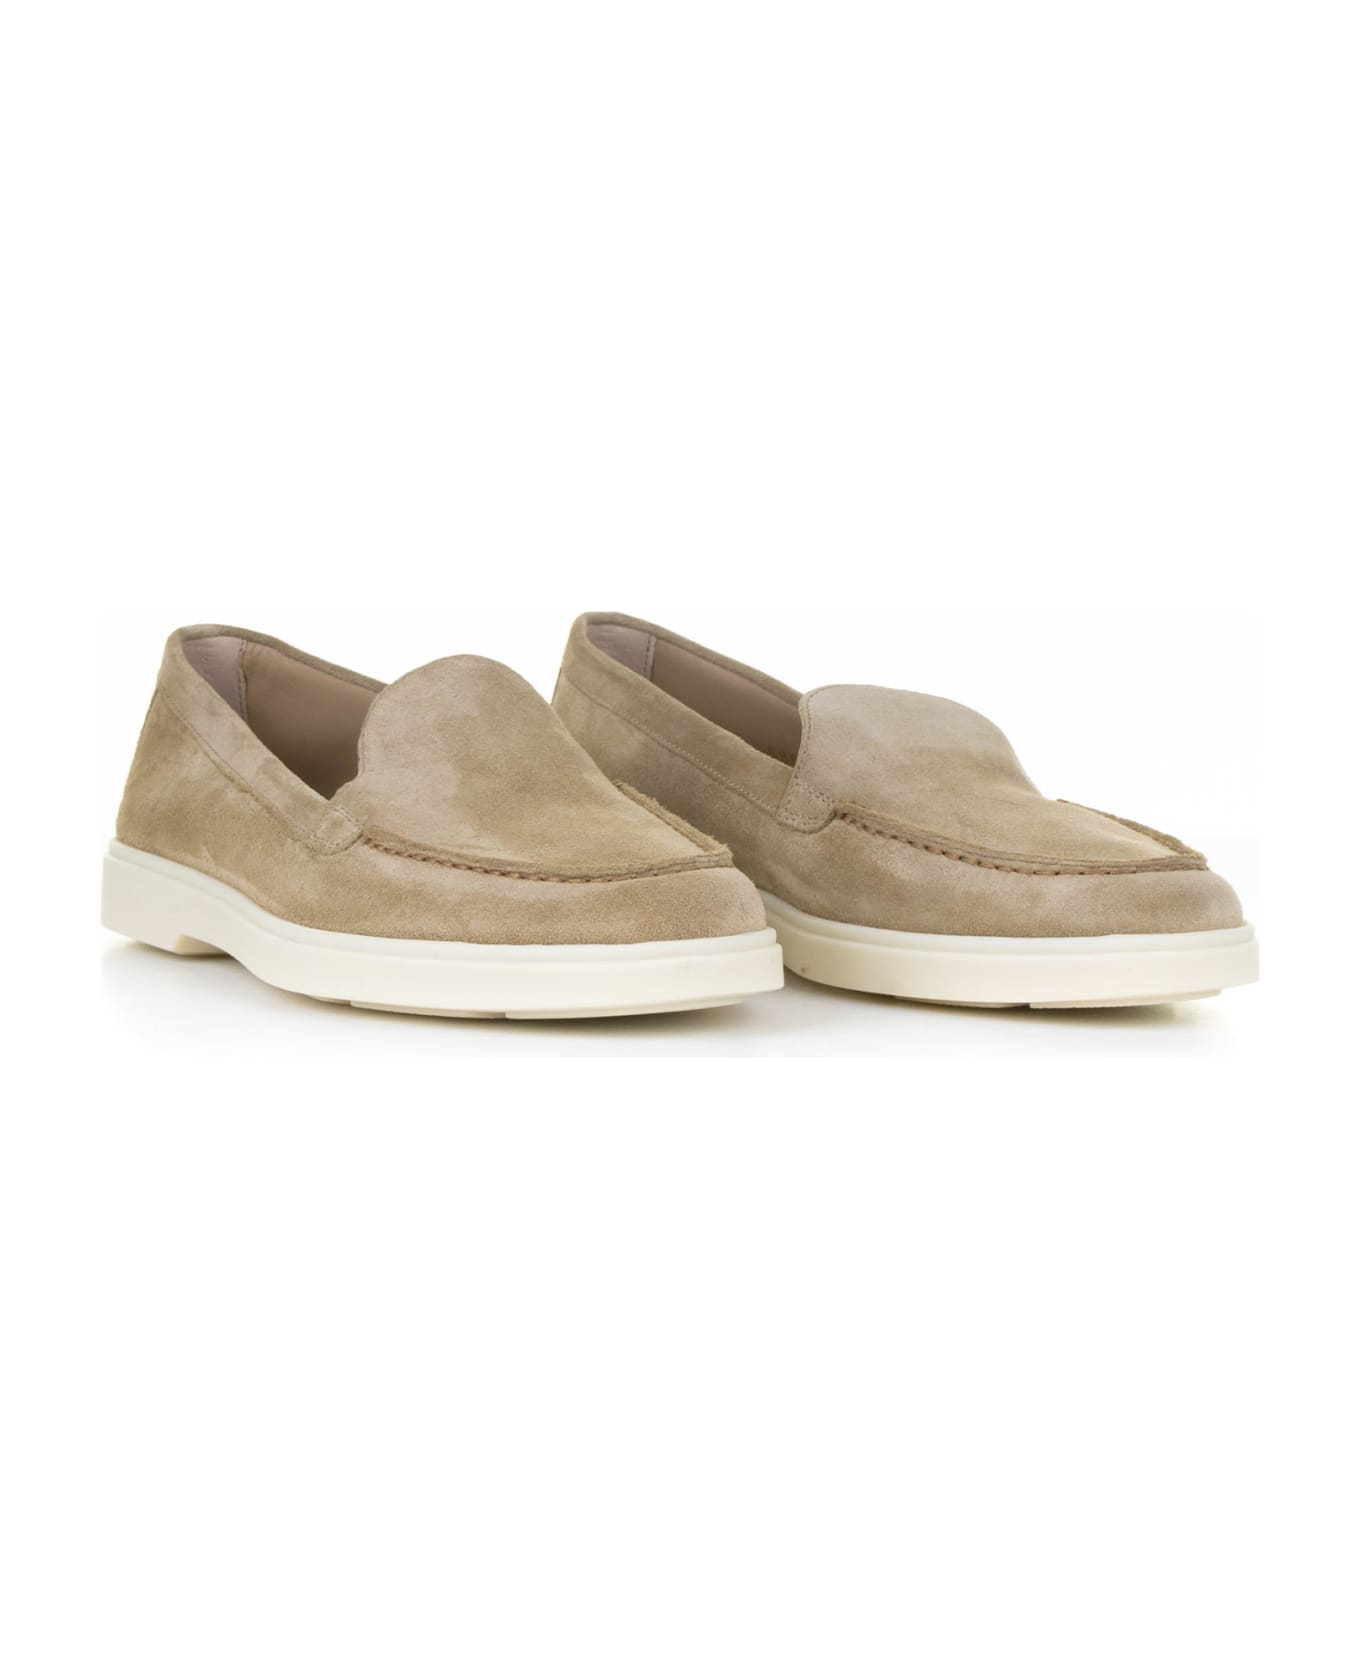 Santoni Brown Moccasin In Suede And Rubber Sole - BROWN フラットシューズ